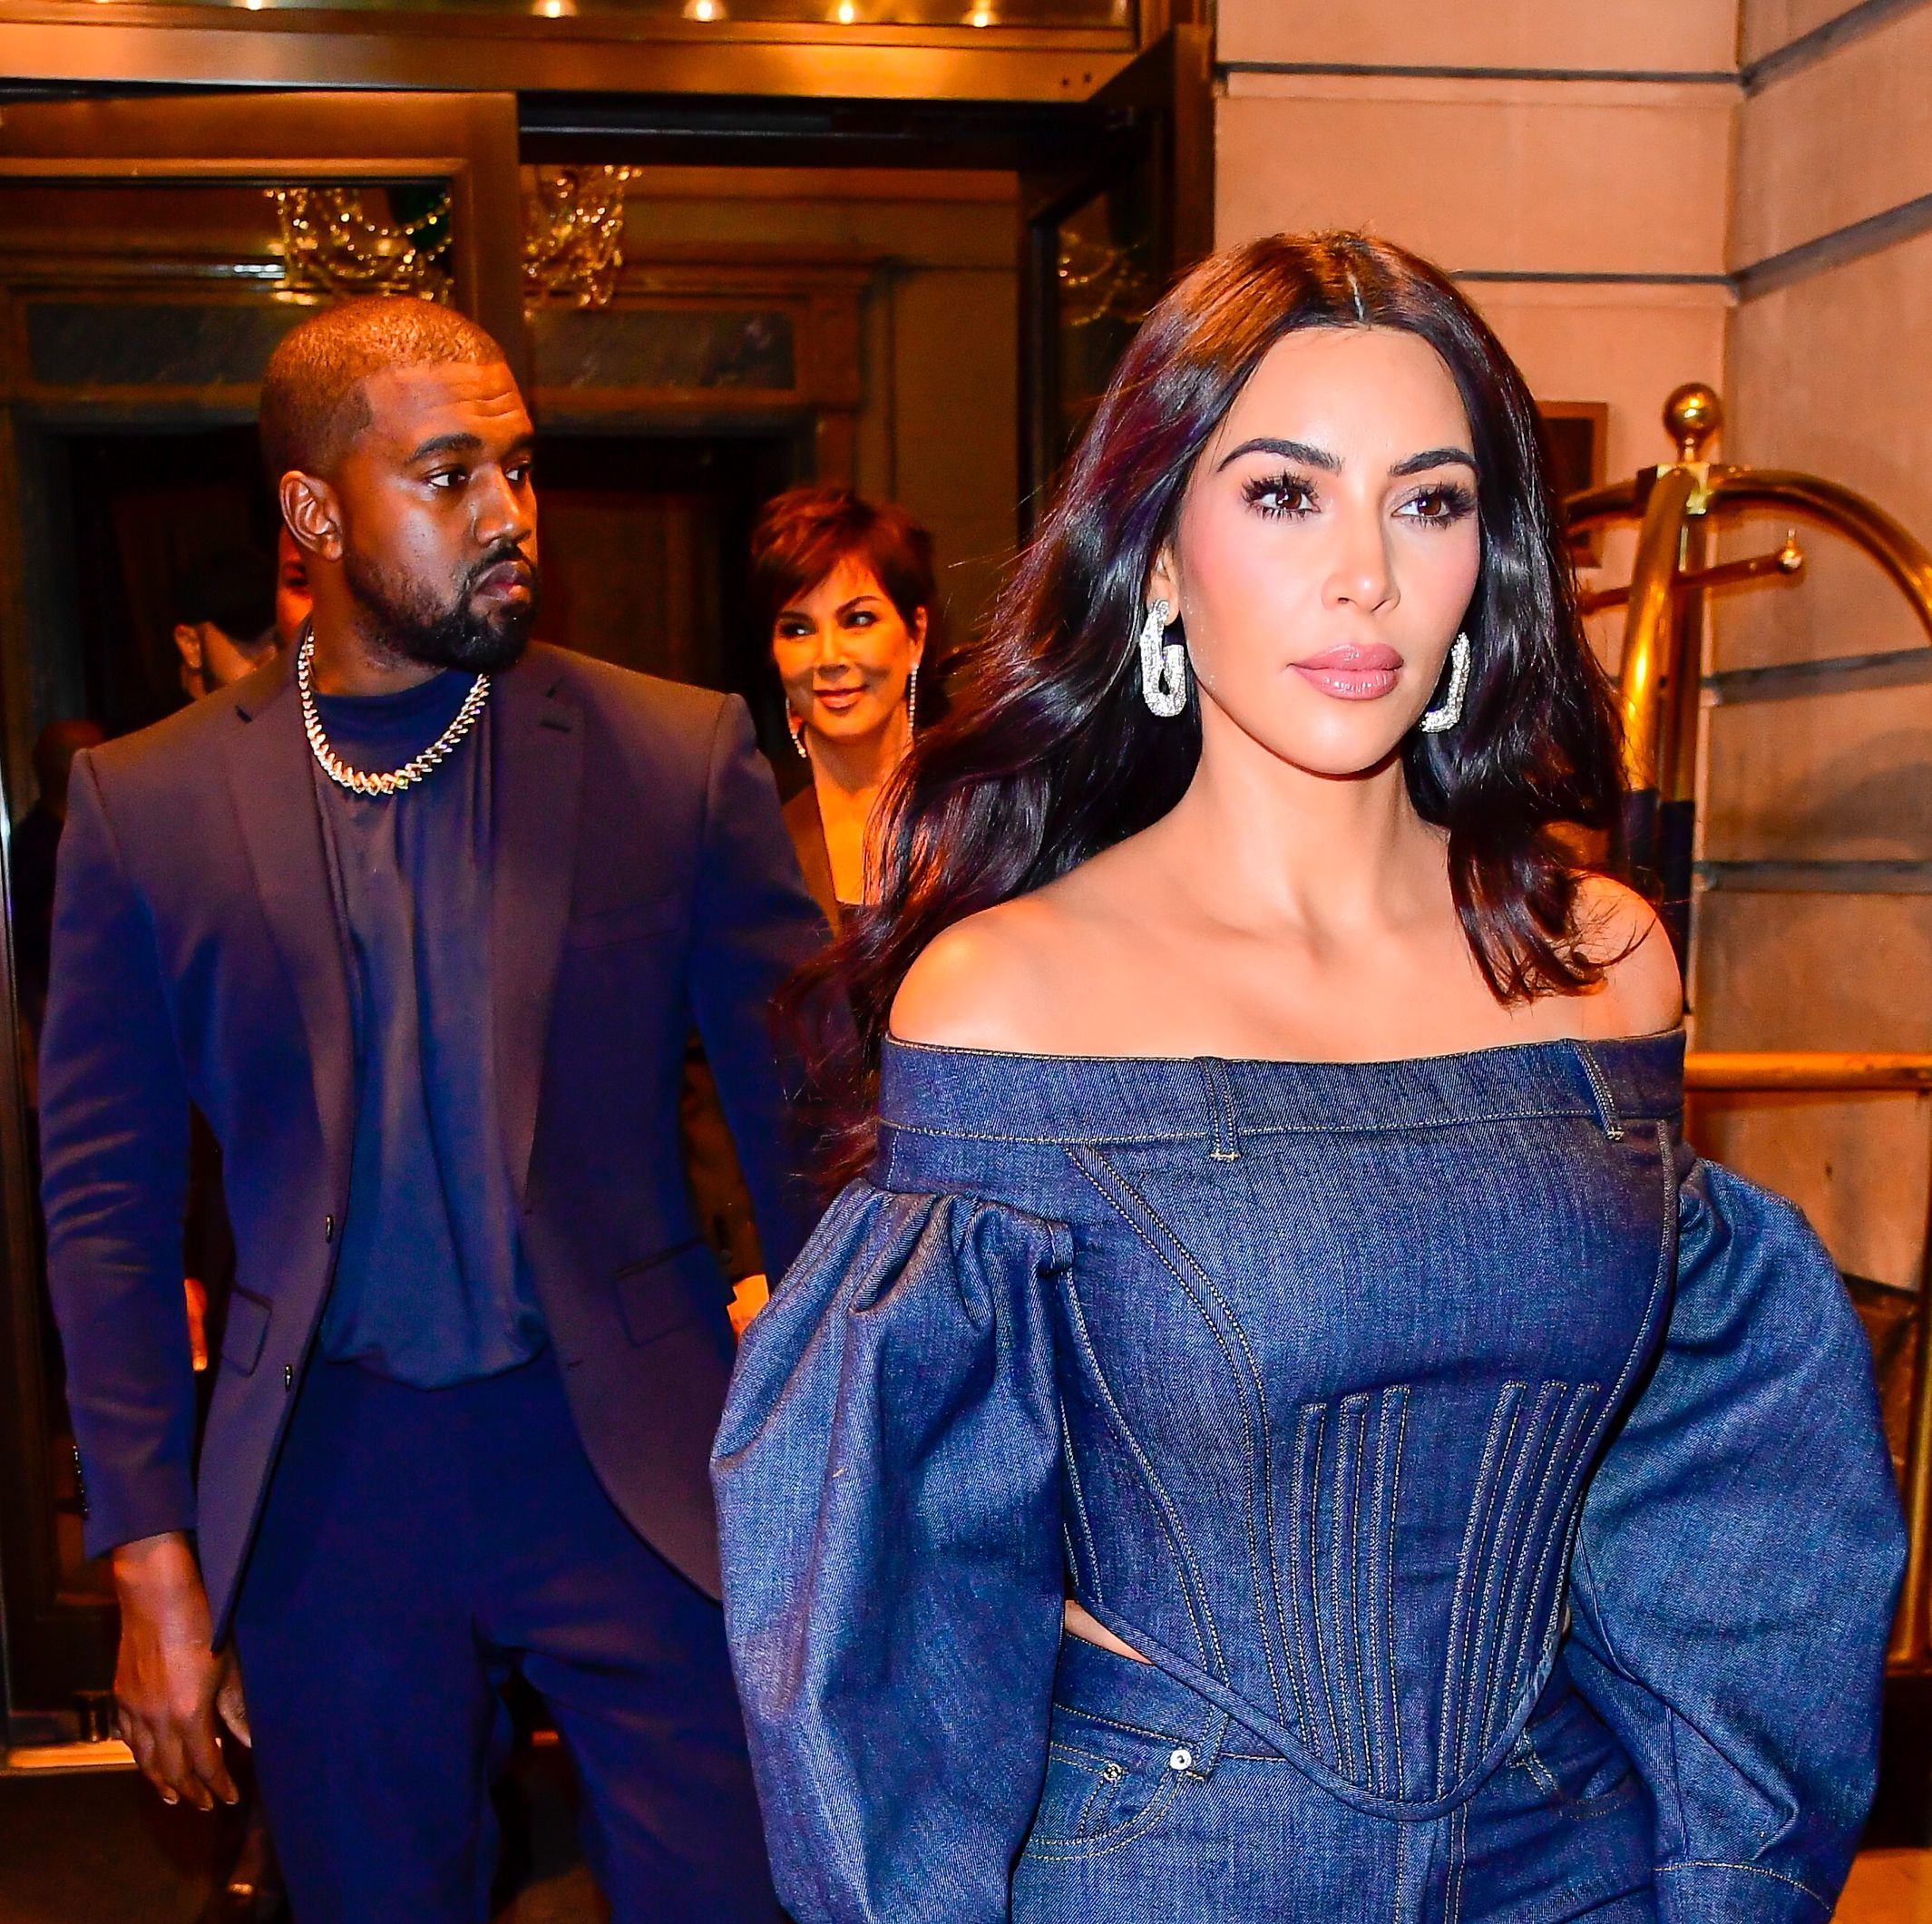 Sooo, Here's Why Kim Kardashian Finally Responded Publicly to Kanye West's 